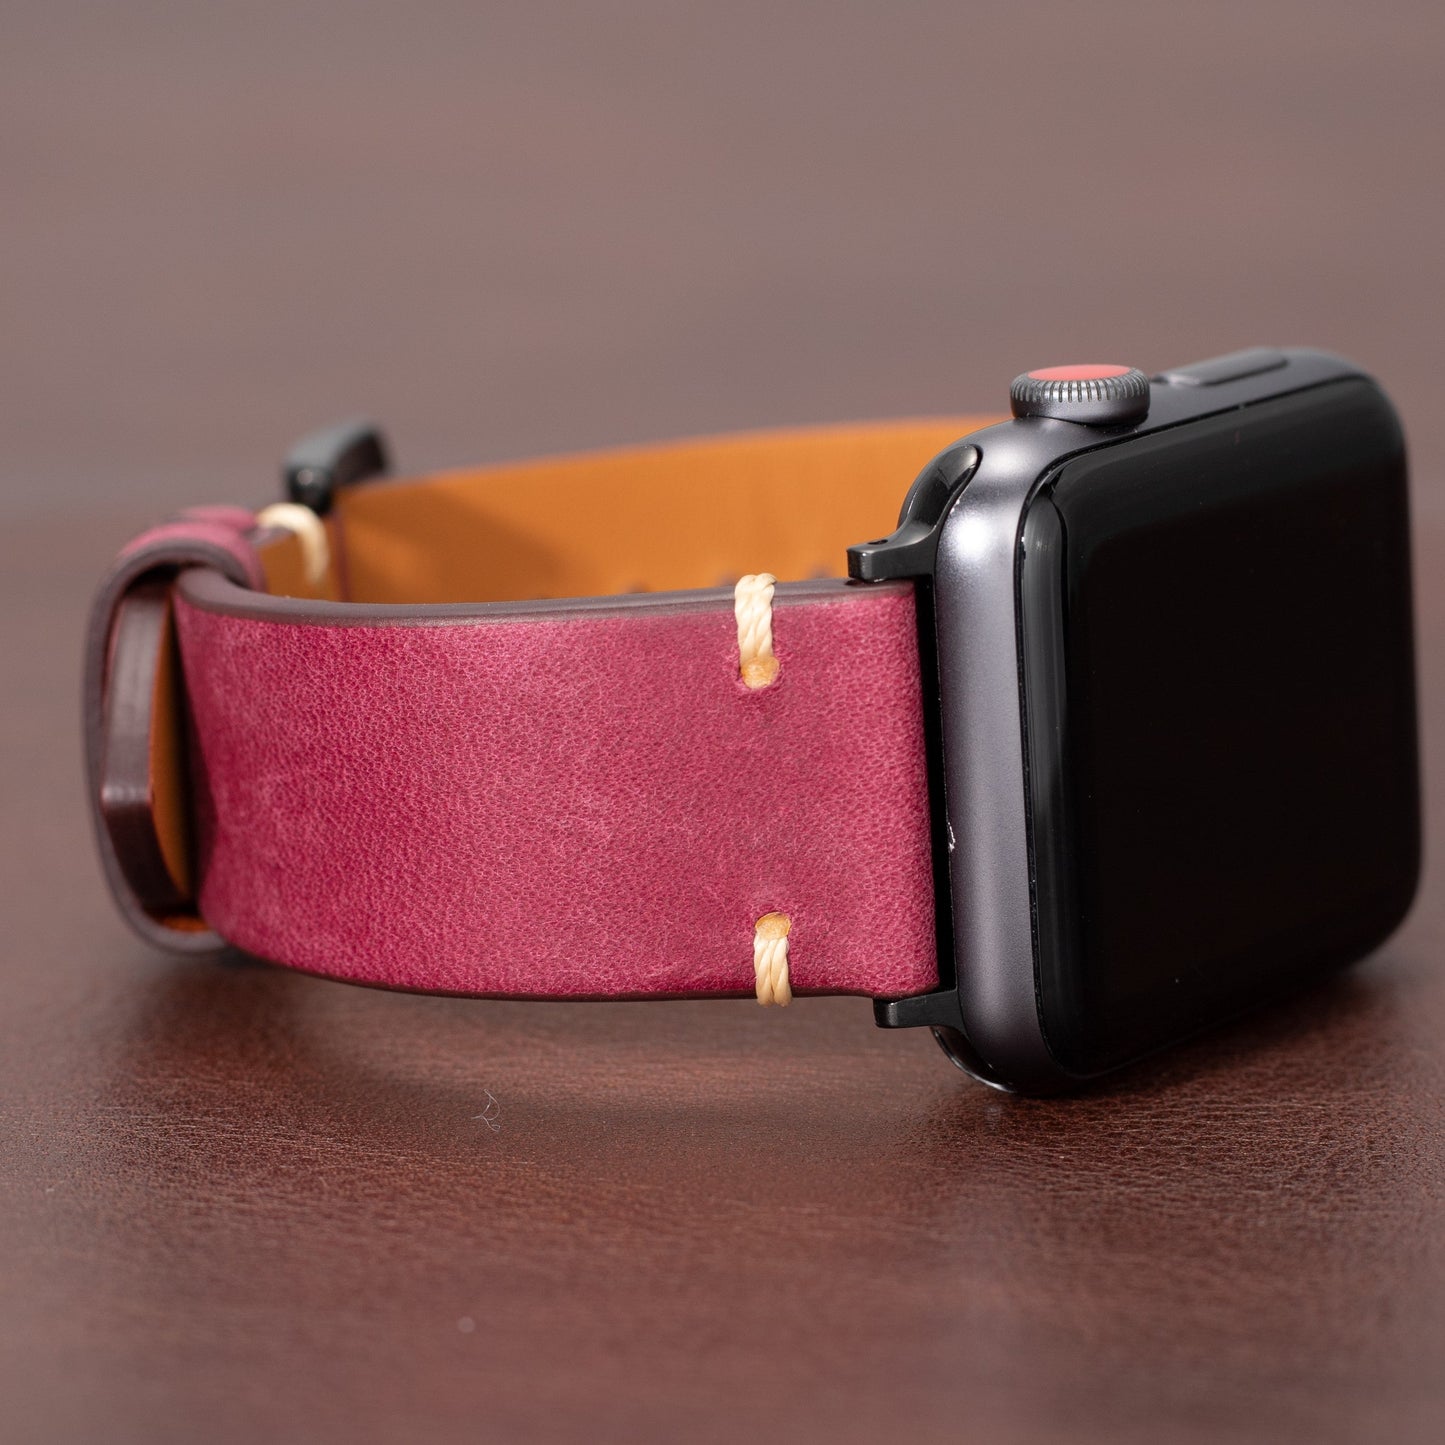 Premium Italian Leather leather Apple Watch Band - Light Red